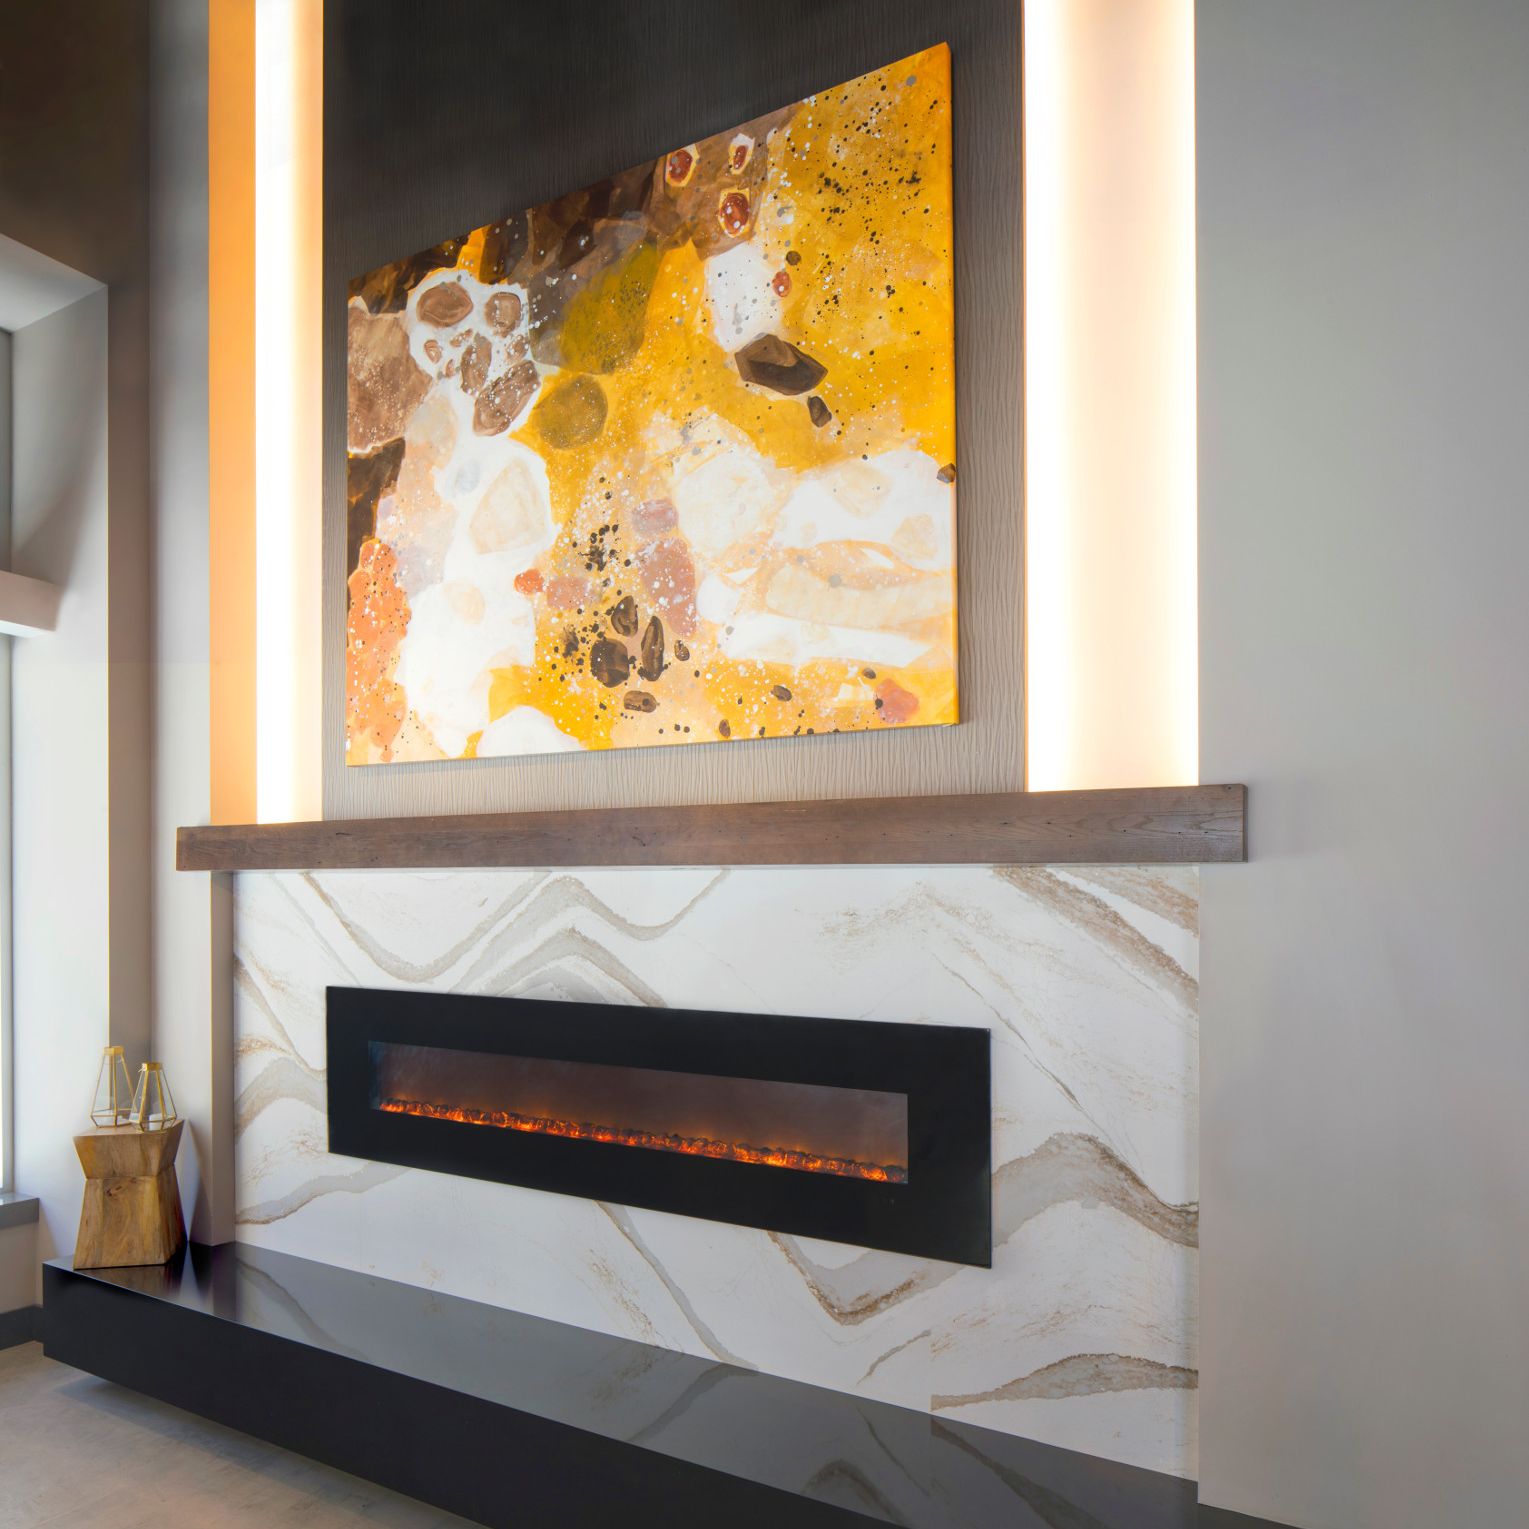  a Brittanicca Gold warm fireplace surround with a large colorful painting above it